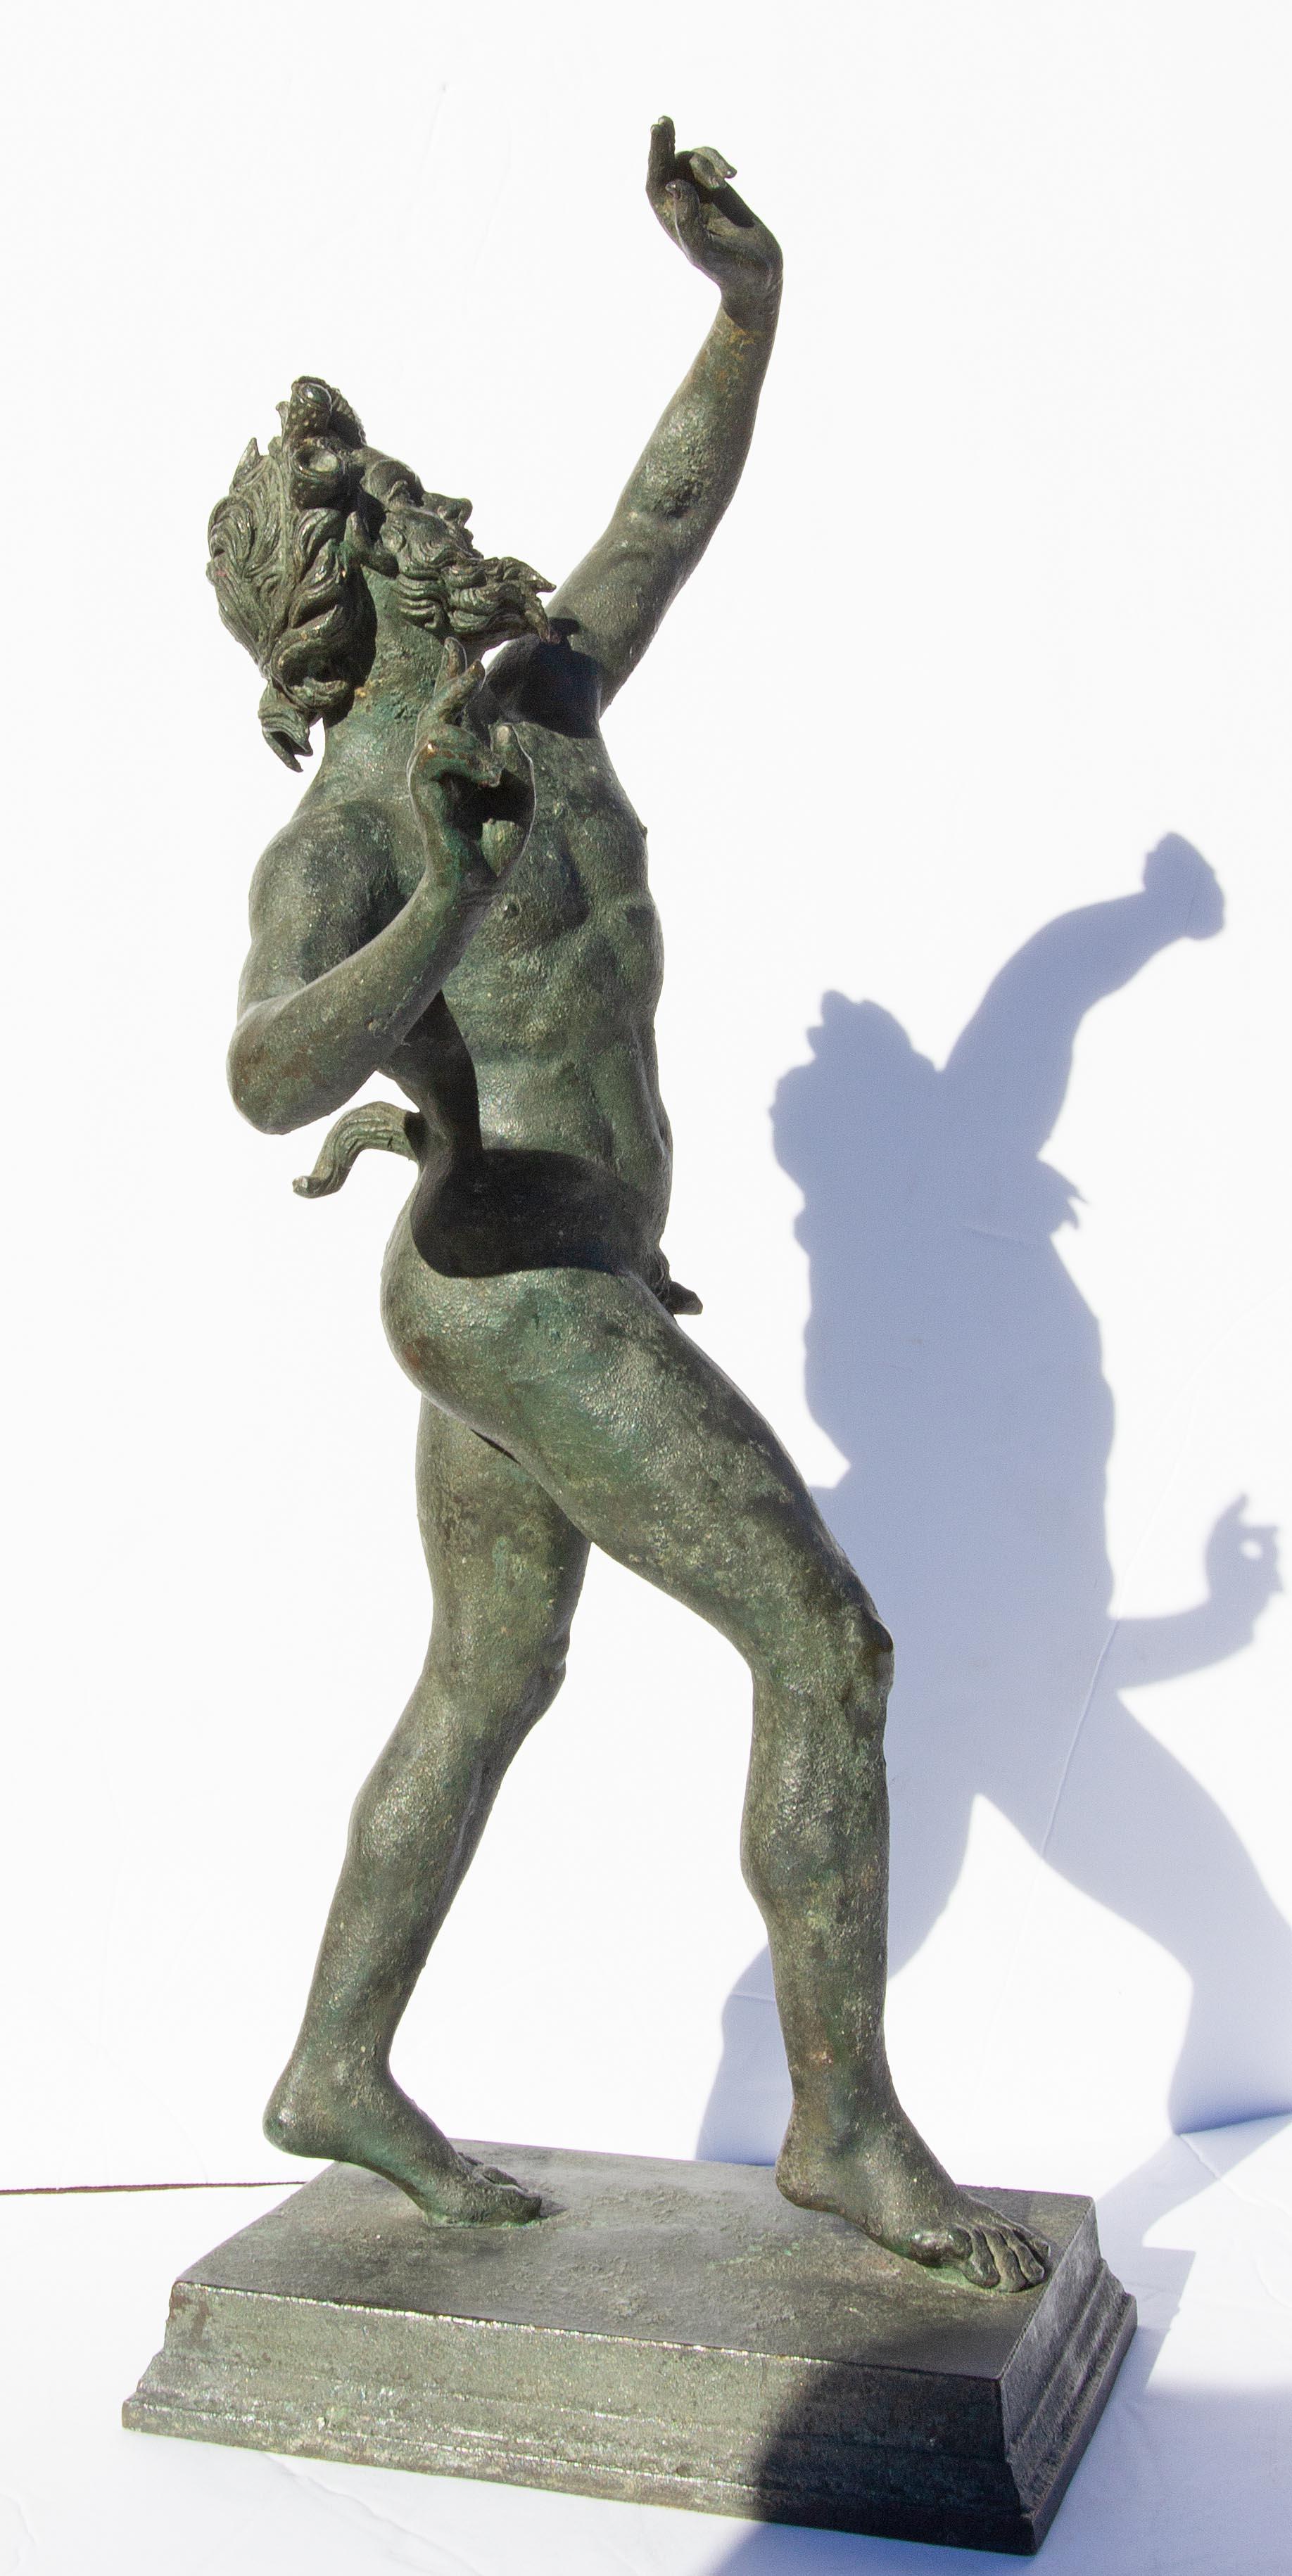 Grand Tour bronze sculpture. Antique early 20th century. Verdigris patina. “The Dancing Faun” of the House of Faun in Pompeii. The House of Faun was the largest and most expensive residence in ancient Pompeii, and today it is the most visited of all